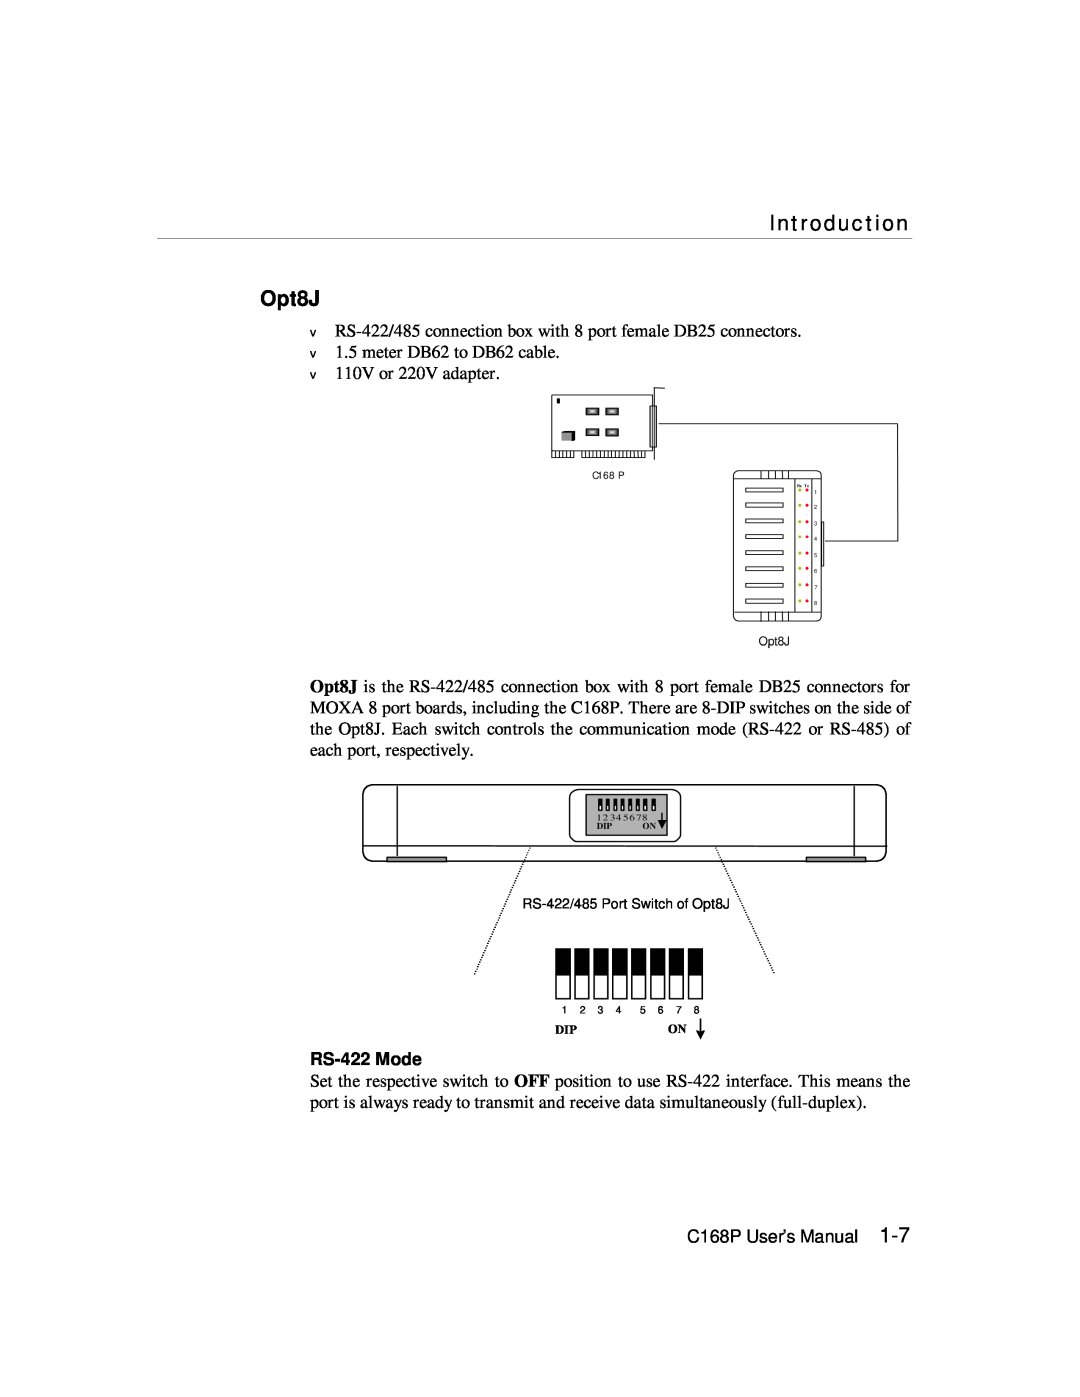 Moxa Technologies C168P user manual Introduction, RS-422 Mode, RS-422/485 Port Switch of Opt8J 